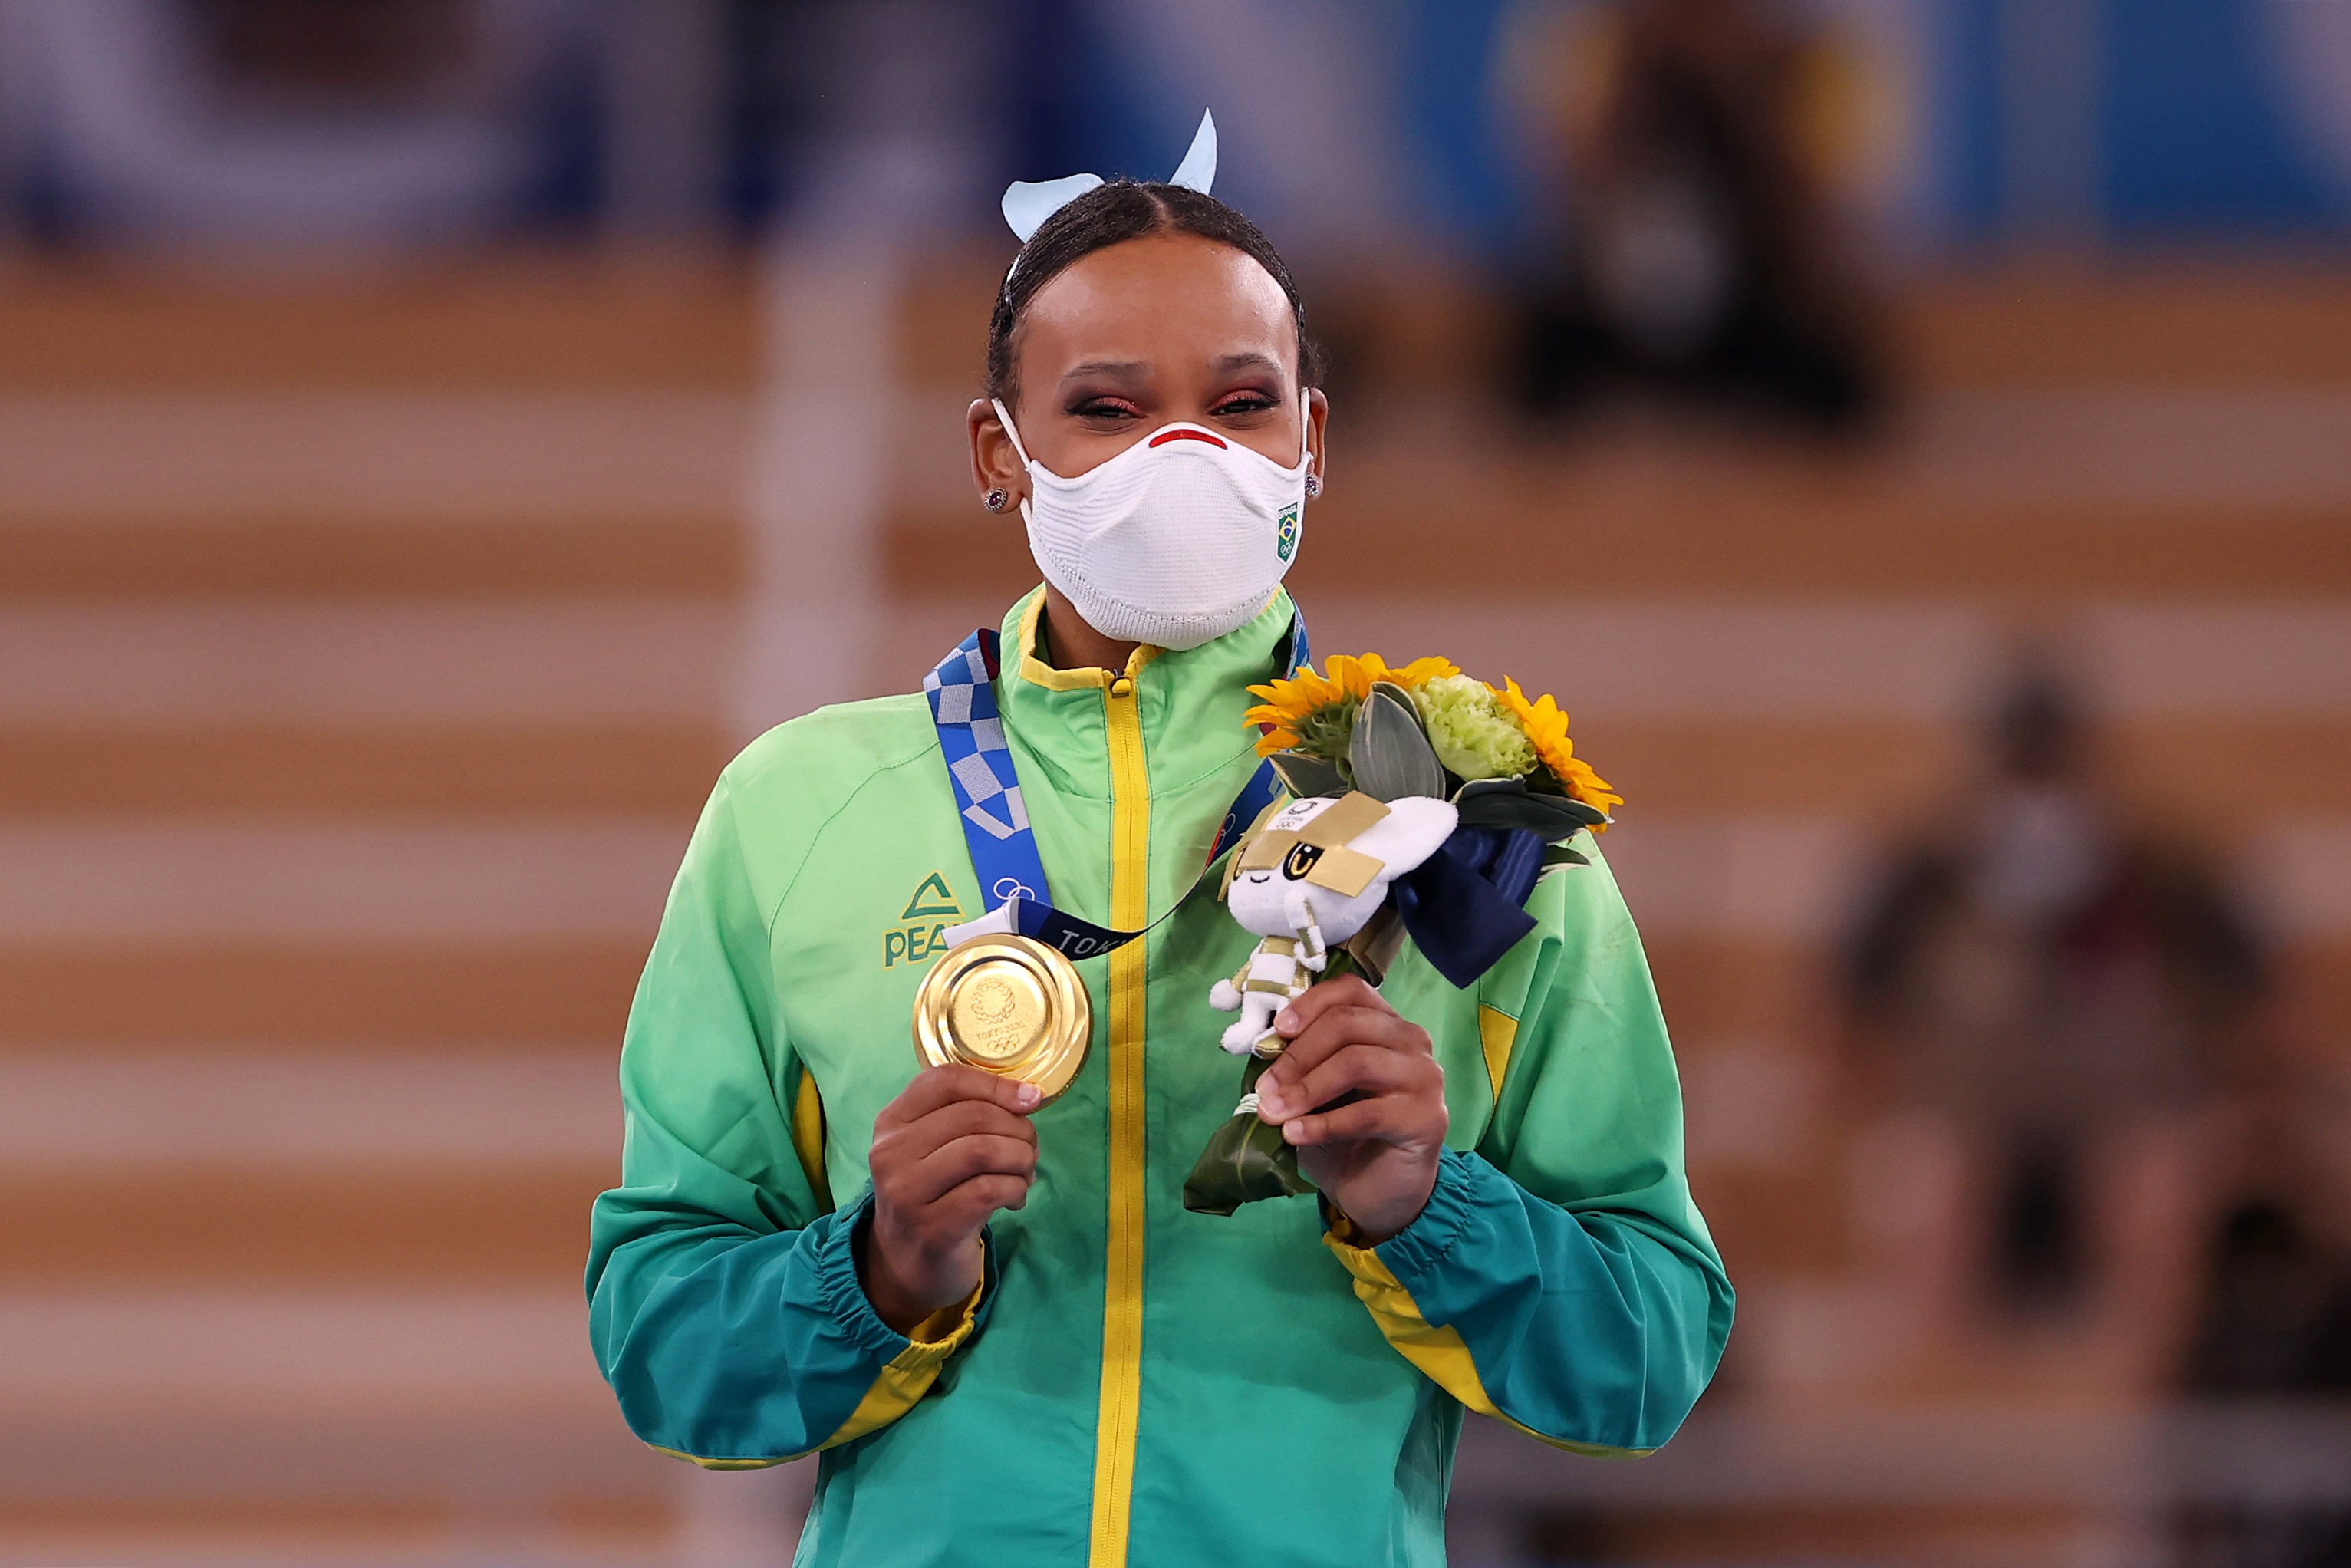 TOKYO, JAPAN - AUGUST 01: Rebeca Andrade of Team Brazil poses with the gold medal during the Women's Vault Final medal ceremony on day nine of the Tokyo 2020 Olympic Games at Ariake Gymnastics Centre on August 01, 2021 in Tokyo, Japan. (Photo by Laurence  (Foto: Getty Images)